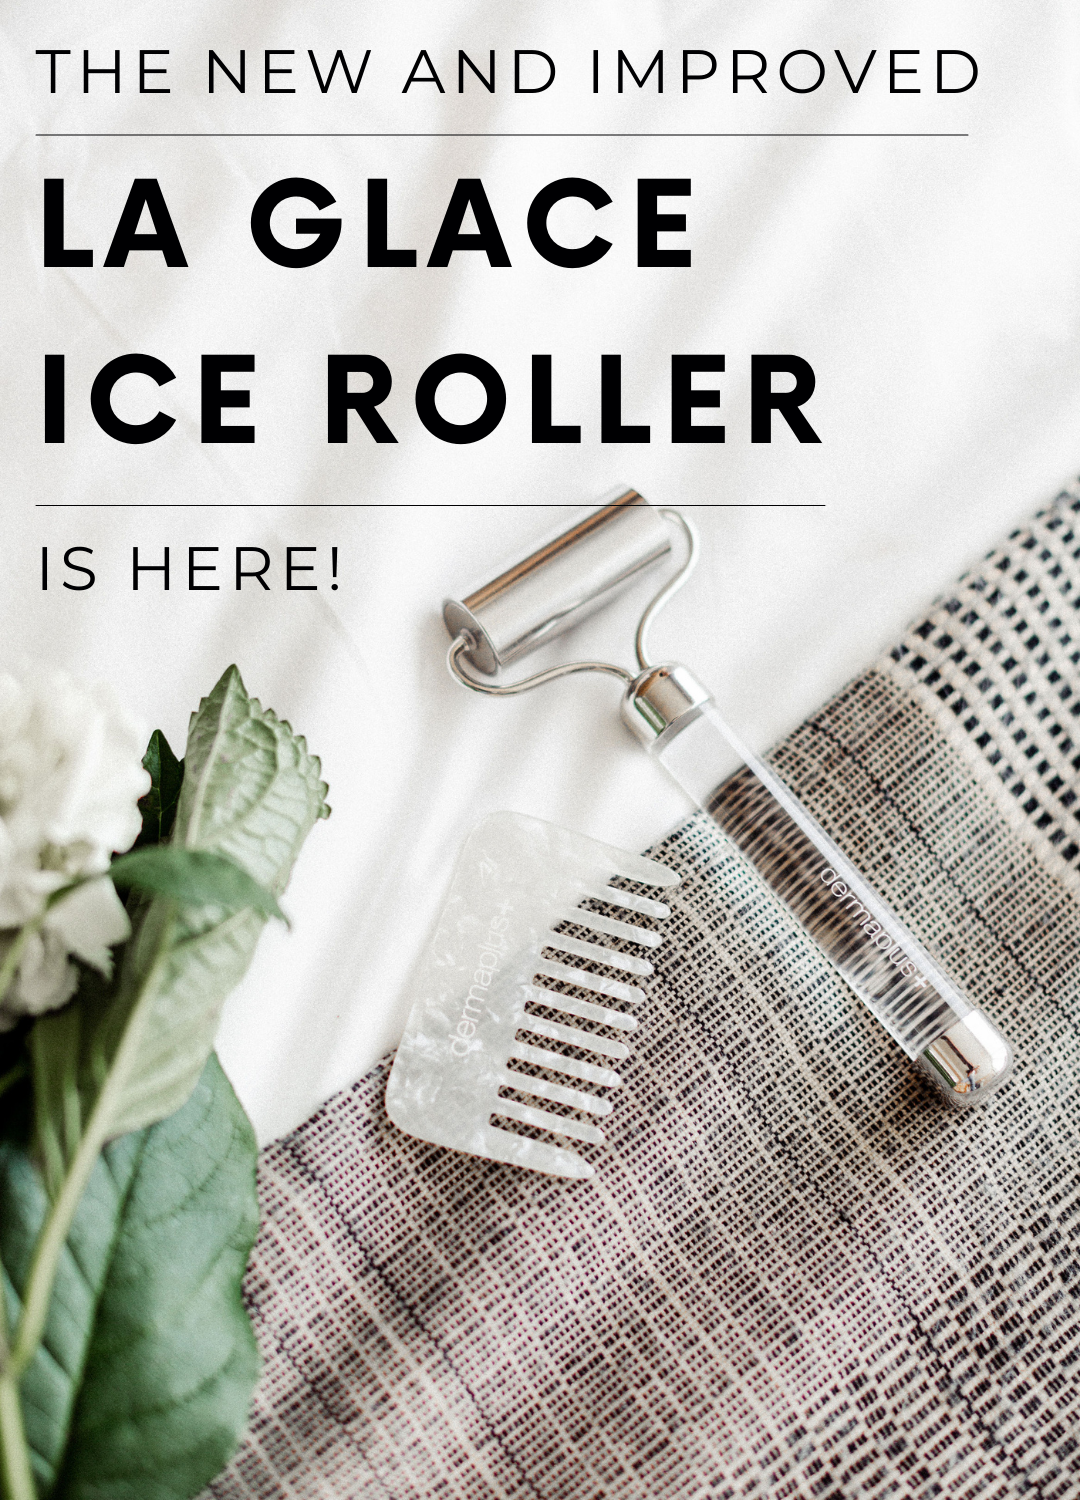 The New and Improved La Glace Ice Roller Is Here!